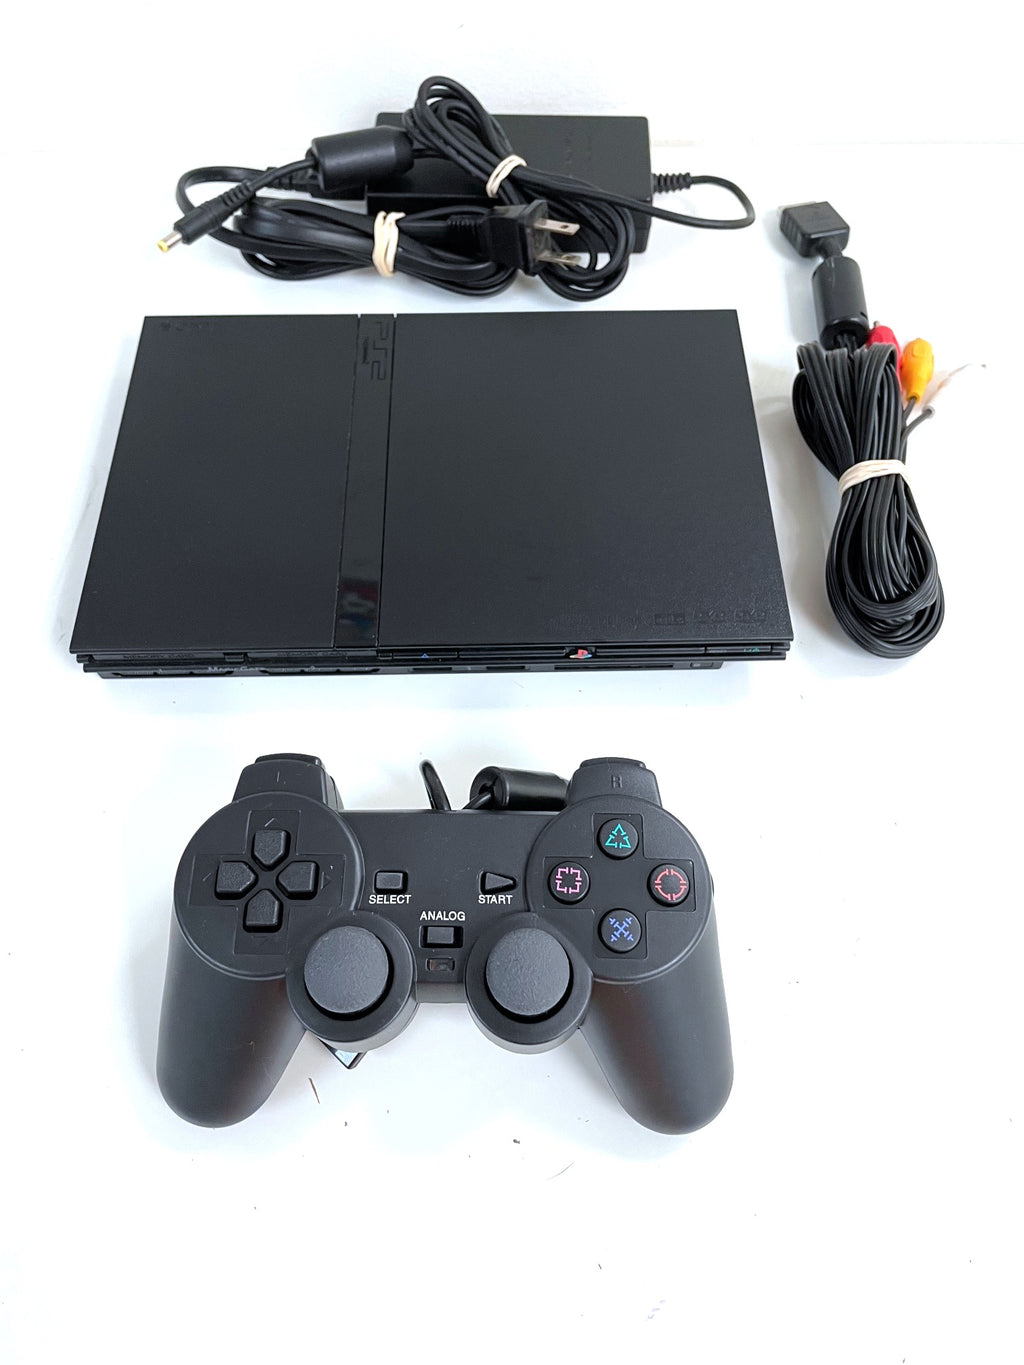 Playstation 2 Slim System Console on Sale